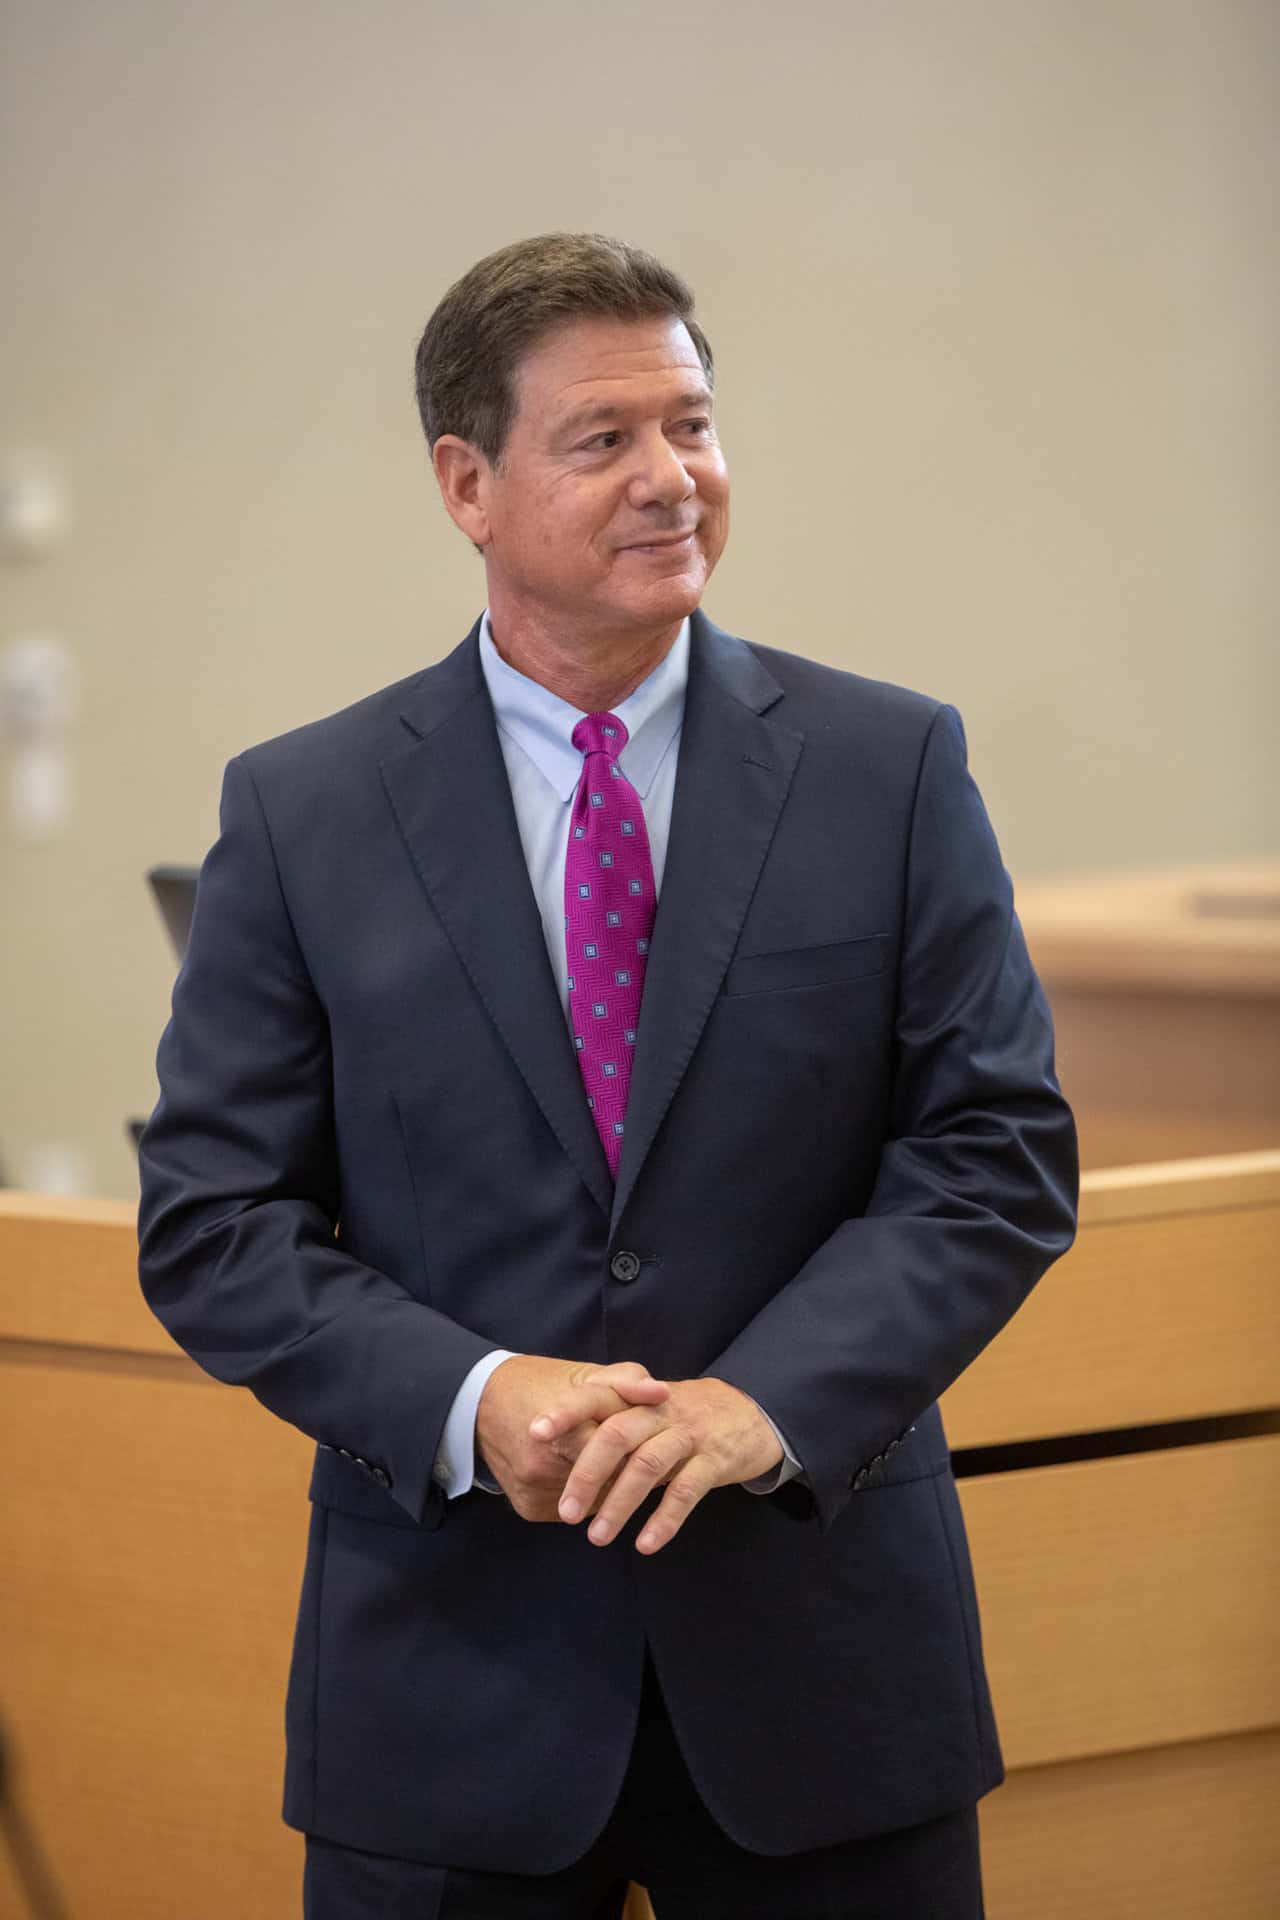 Robert J. Trentacosta, judge for the Superior Court of San Diego County